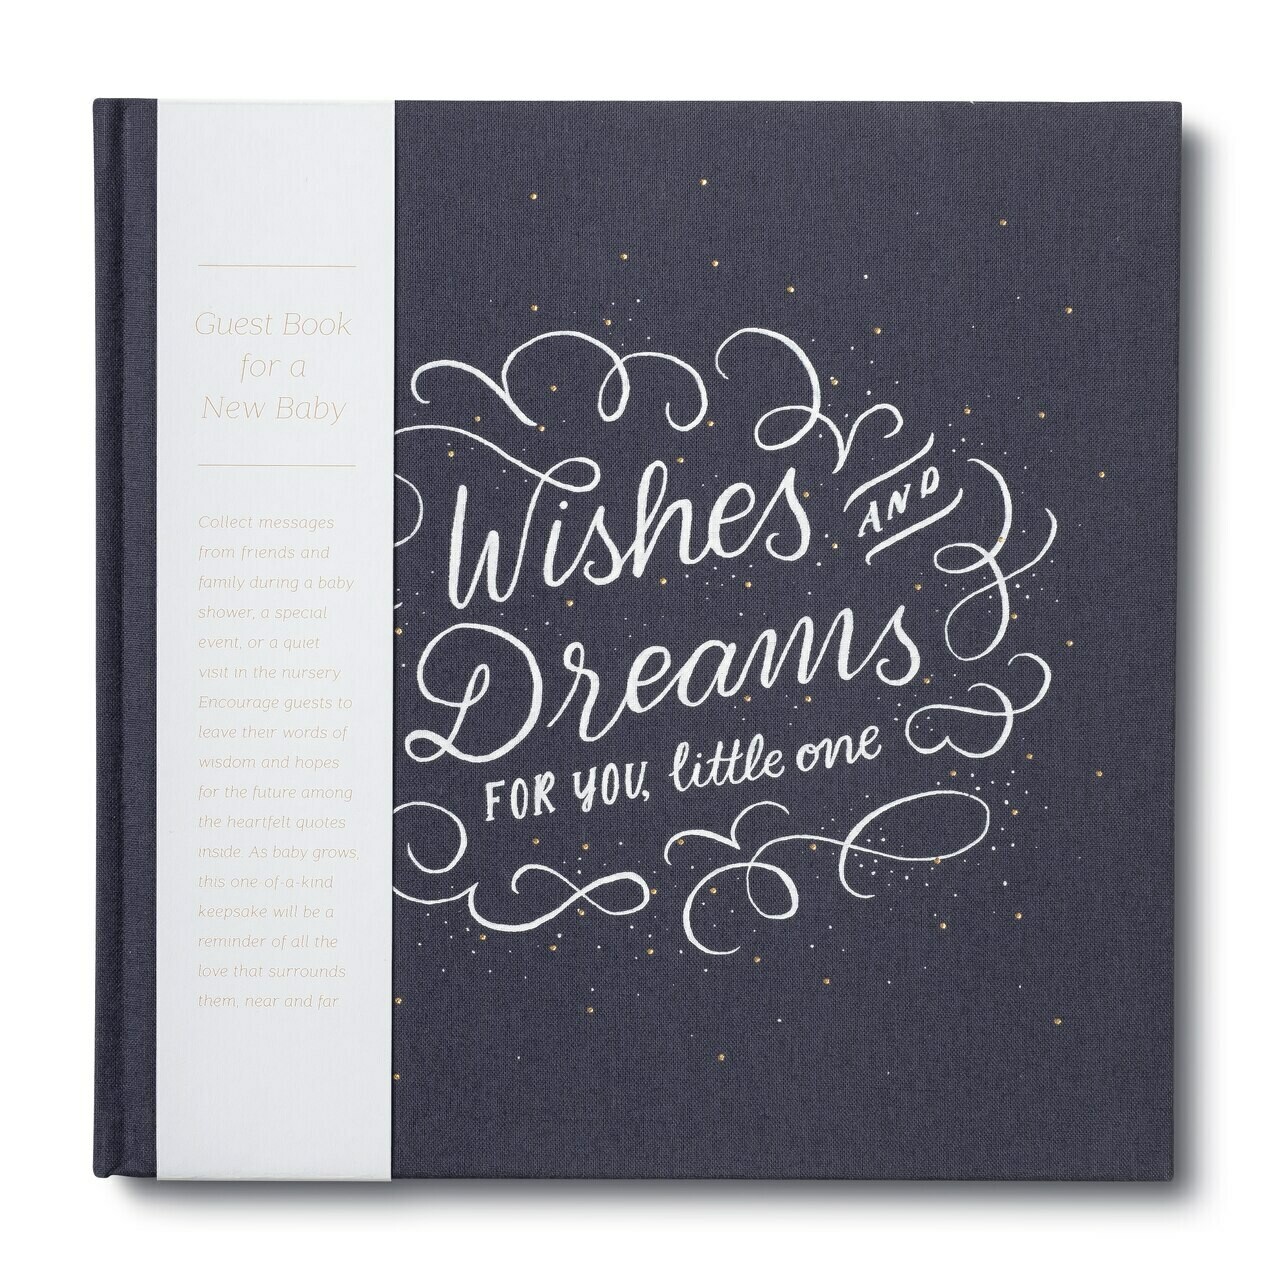 Wishes And Dreams For You, Little One Guest Book